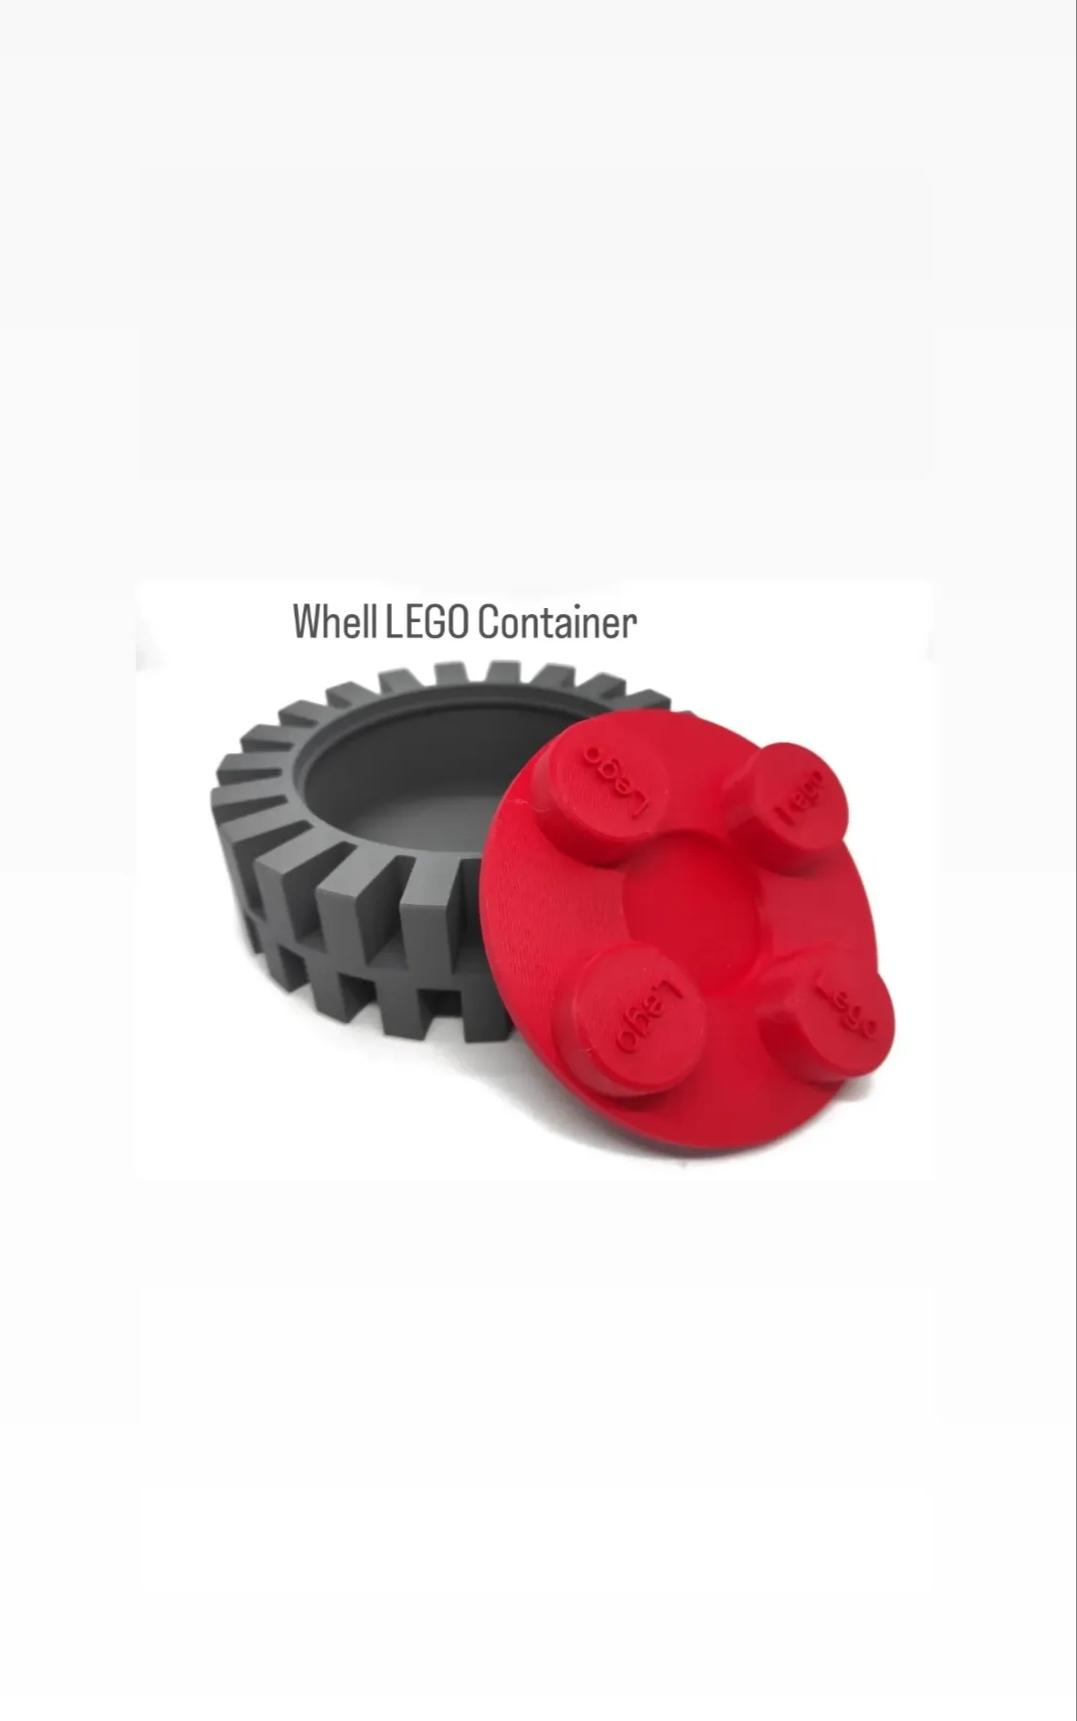  Wheel Lego Container 3d model